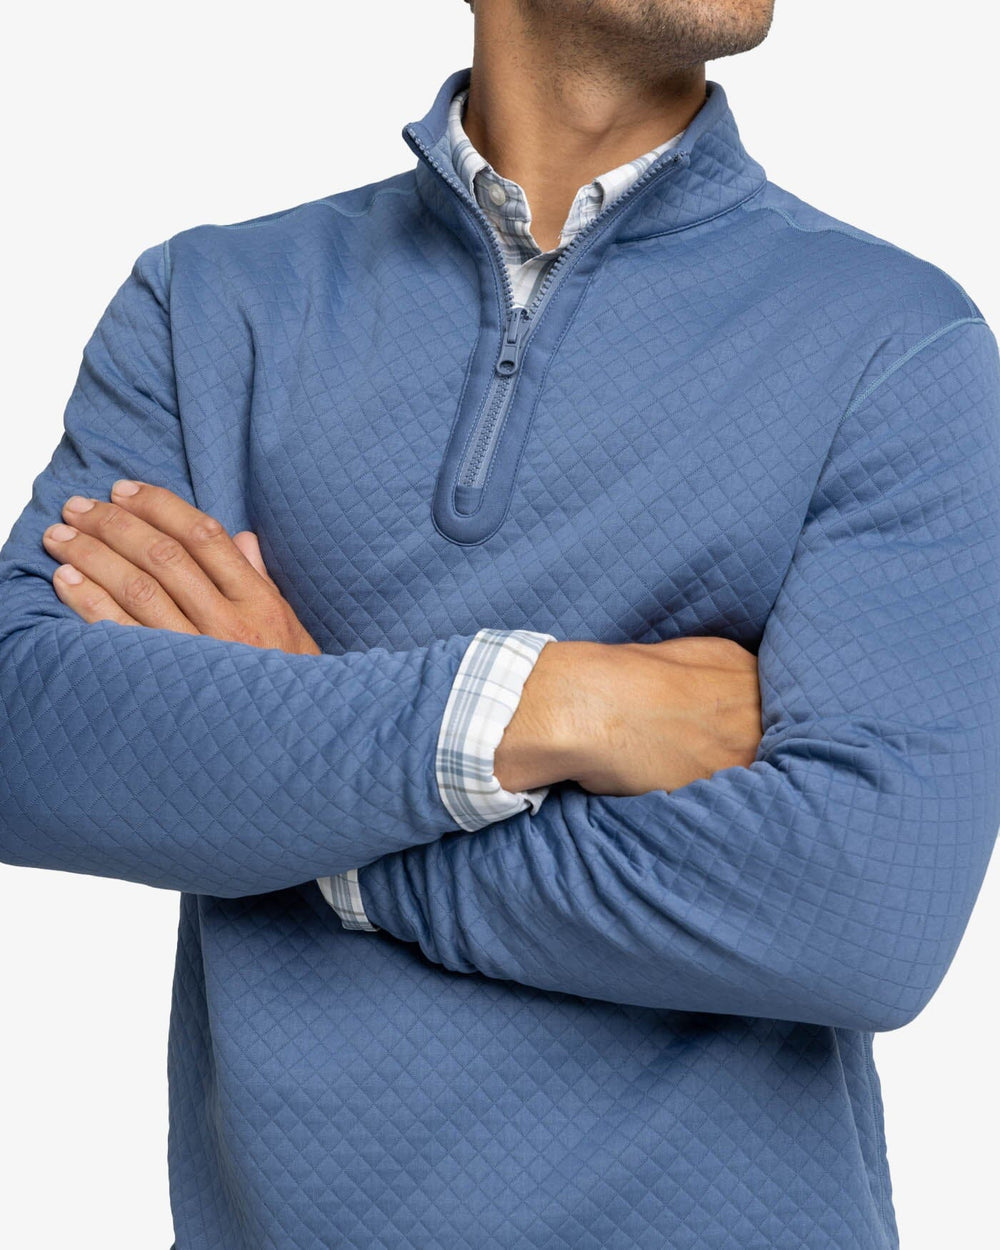 The detail view of the Southern Tide Arden Reversible Quarter Zip by Southern Tide - Blue Haze